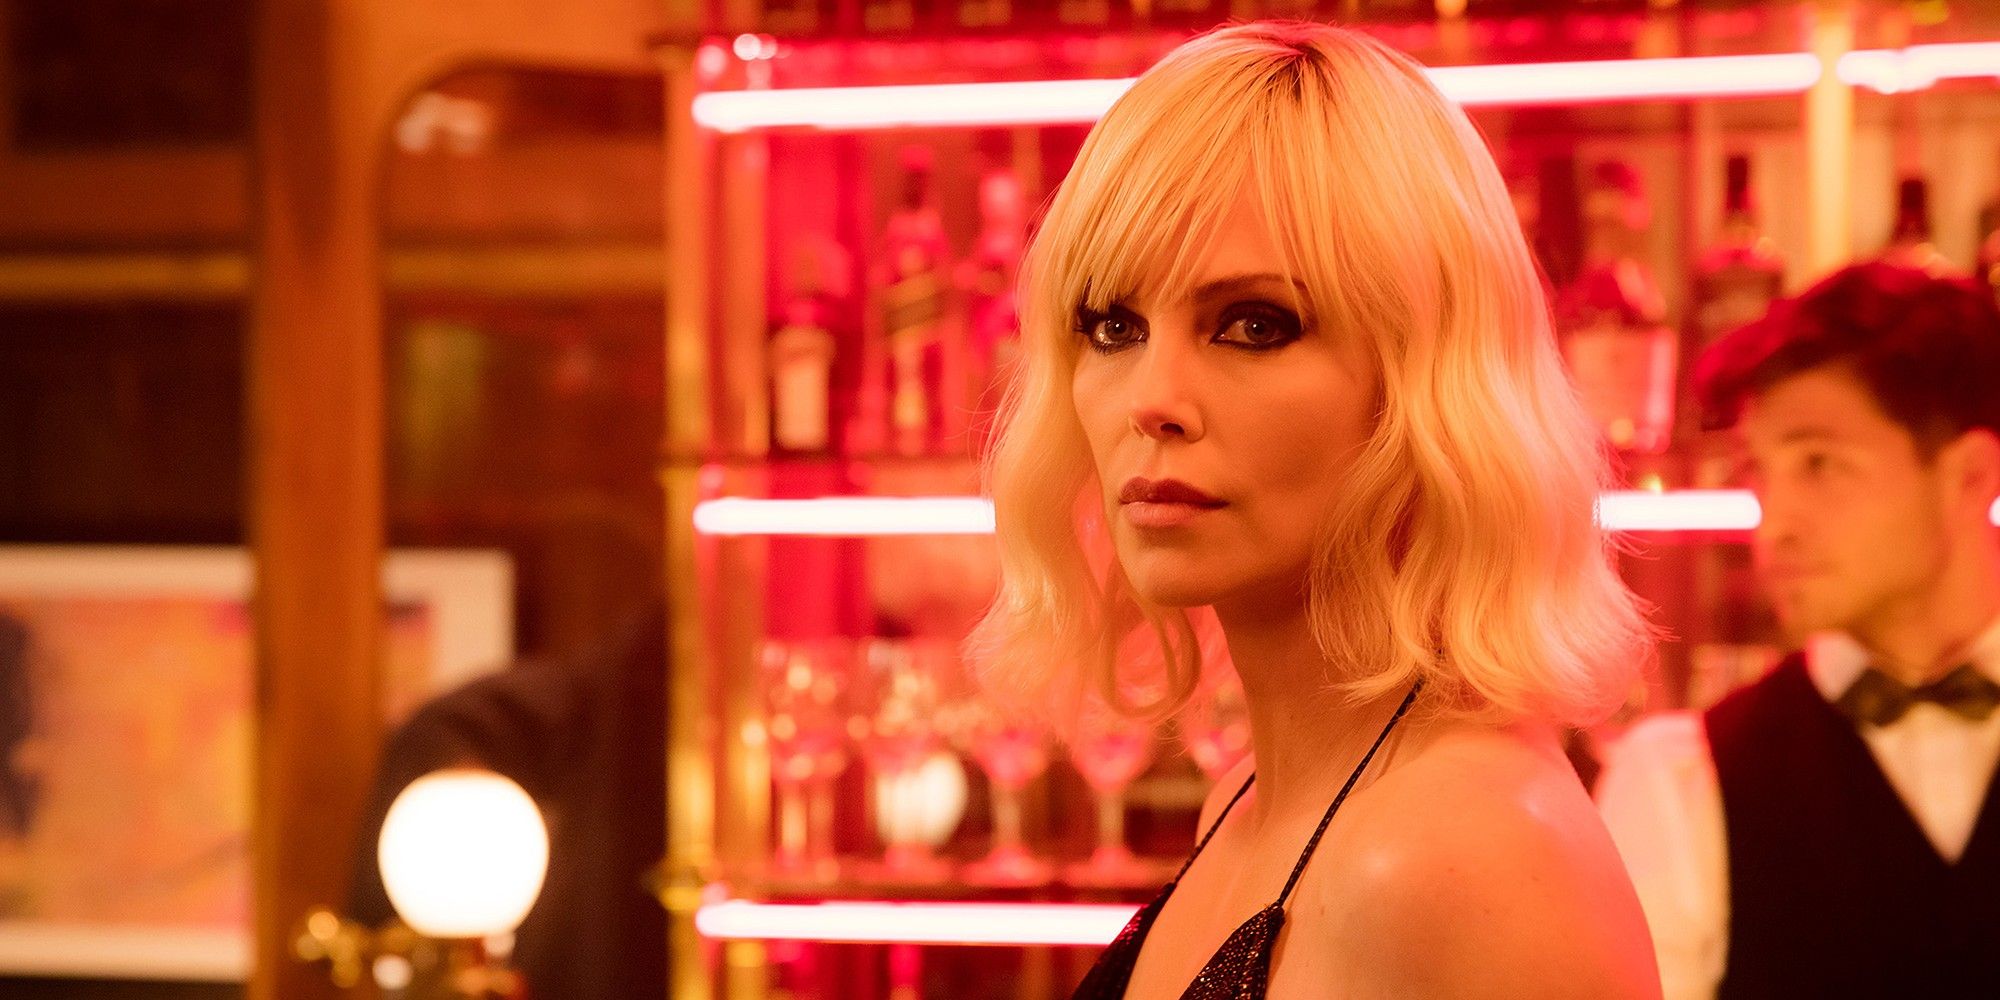 Lorraine, played by Charlize Theron, in Atomic Blonde